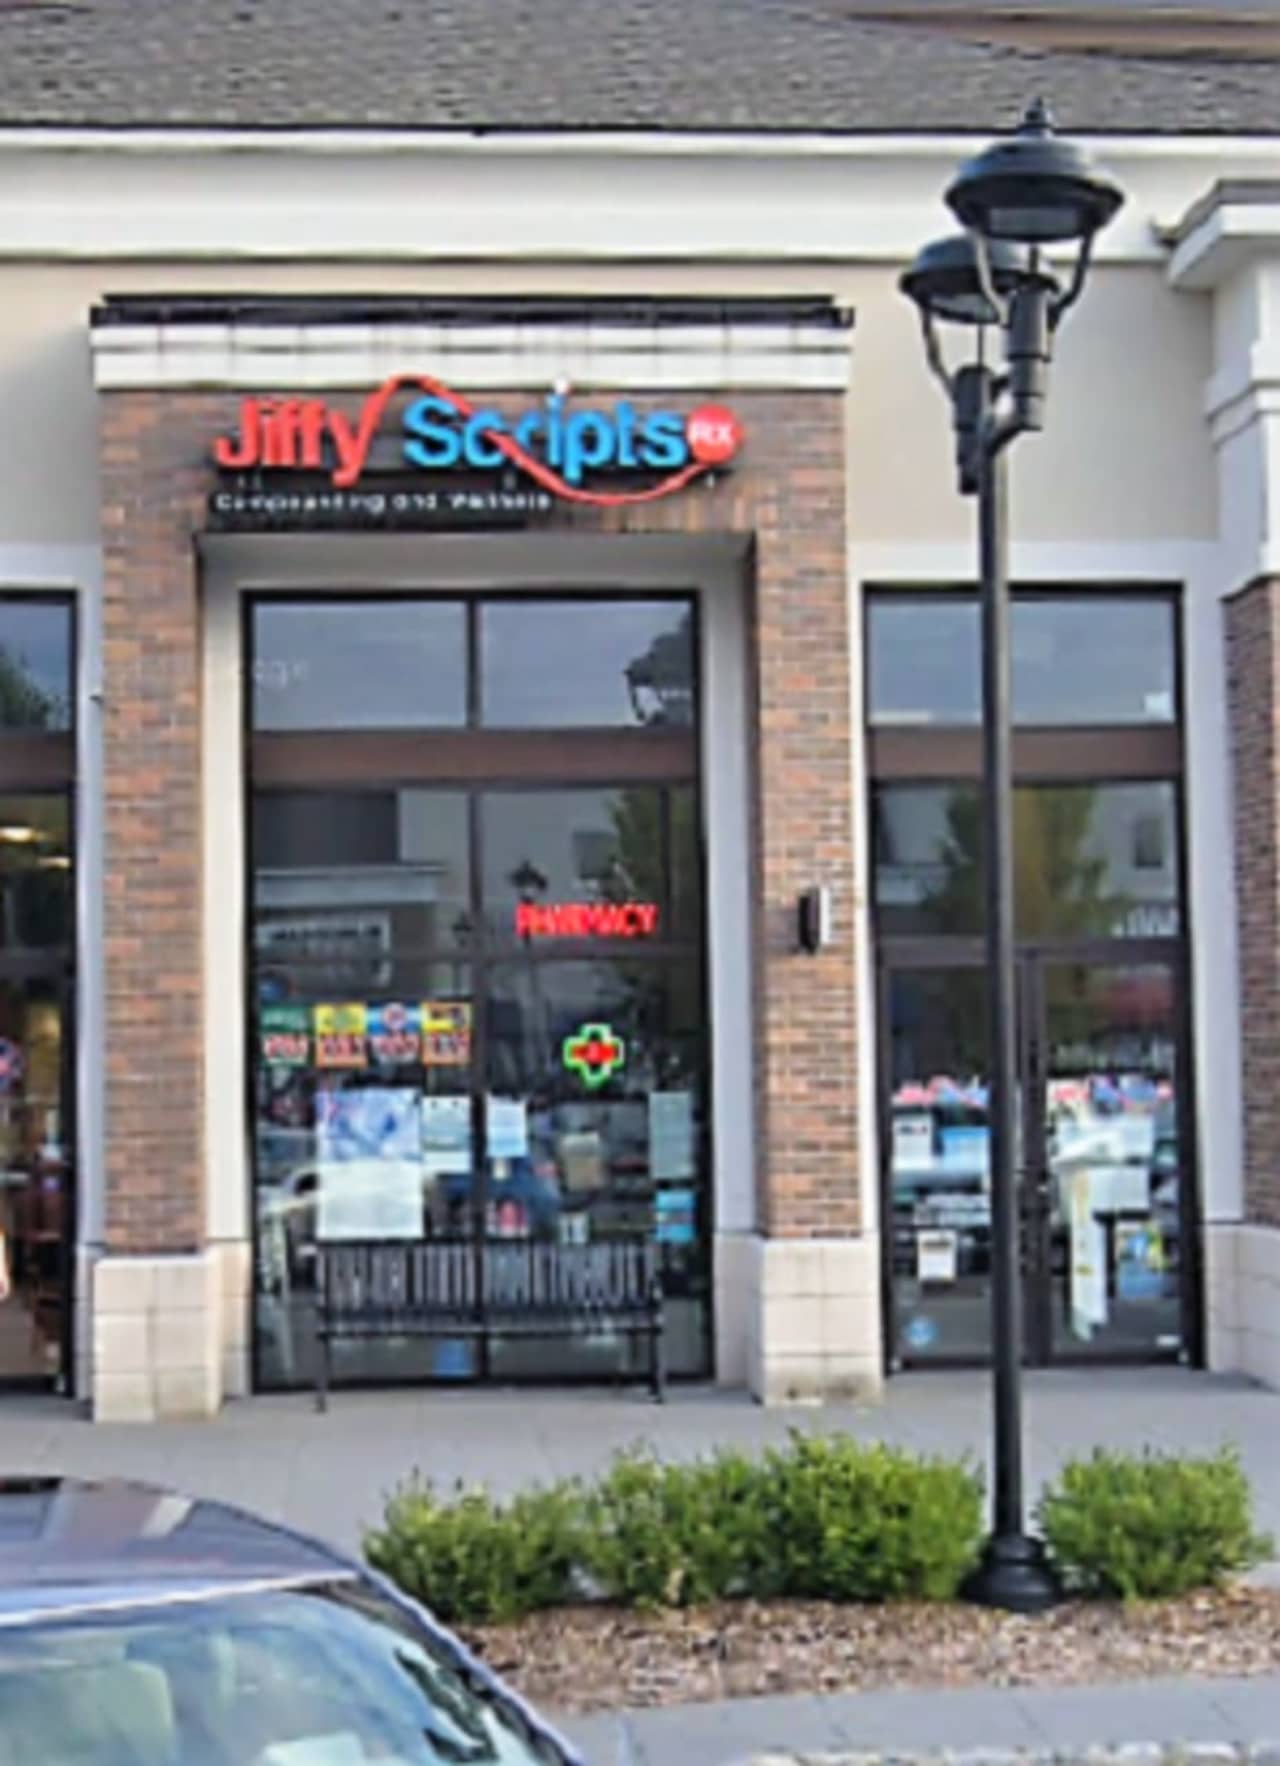 Still facing charges are Dr. Mark Filippone of Wallington and the co-owners of Jiffy Scripts in Fair Lawn, Joseph Vangelas of Fort Lee. and Marlene Vangelas of River Vale.